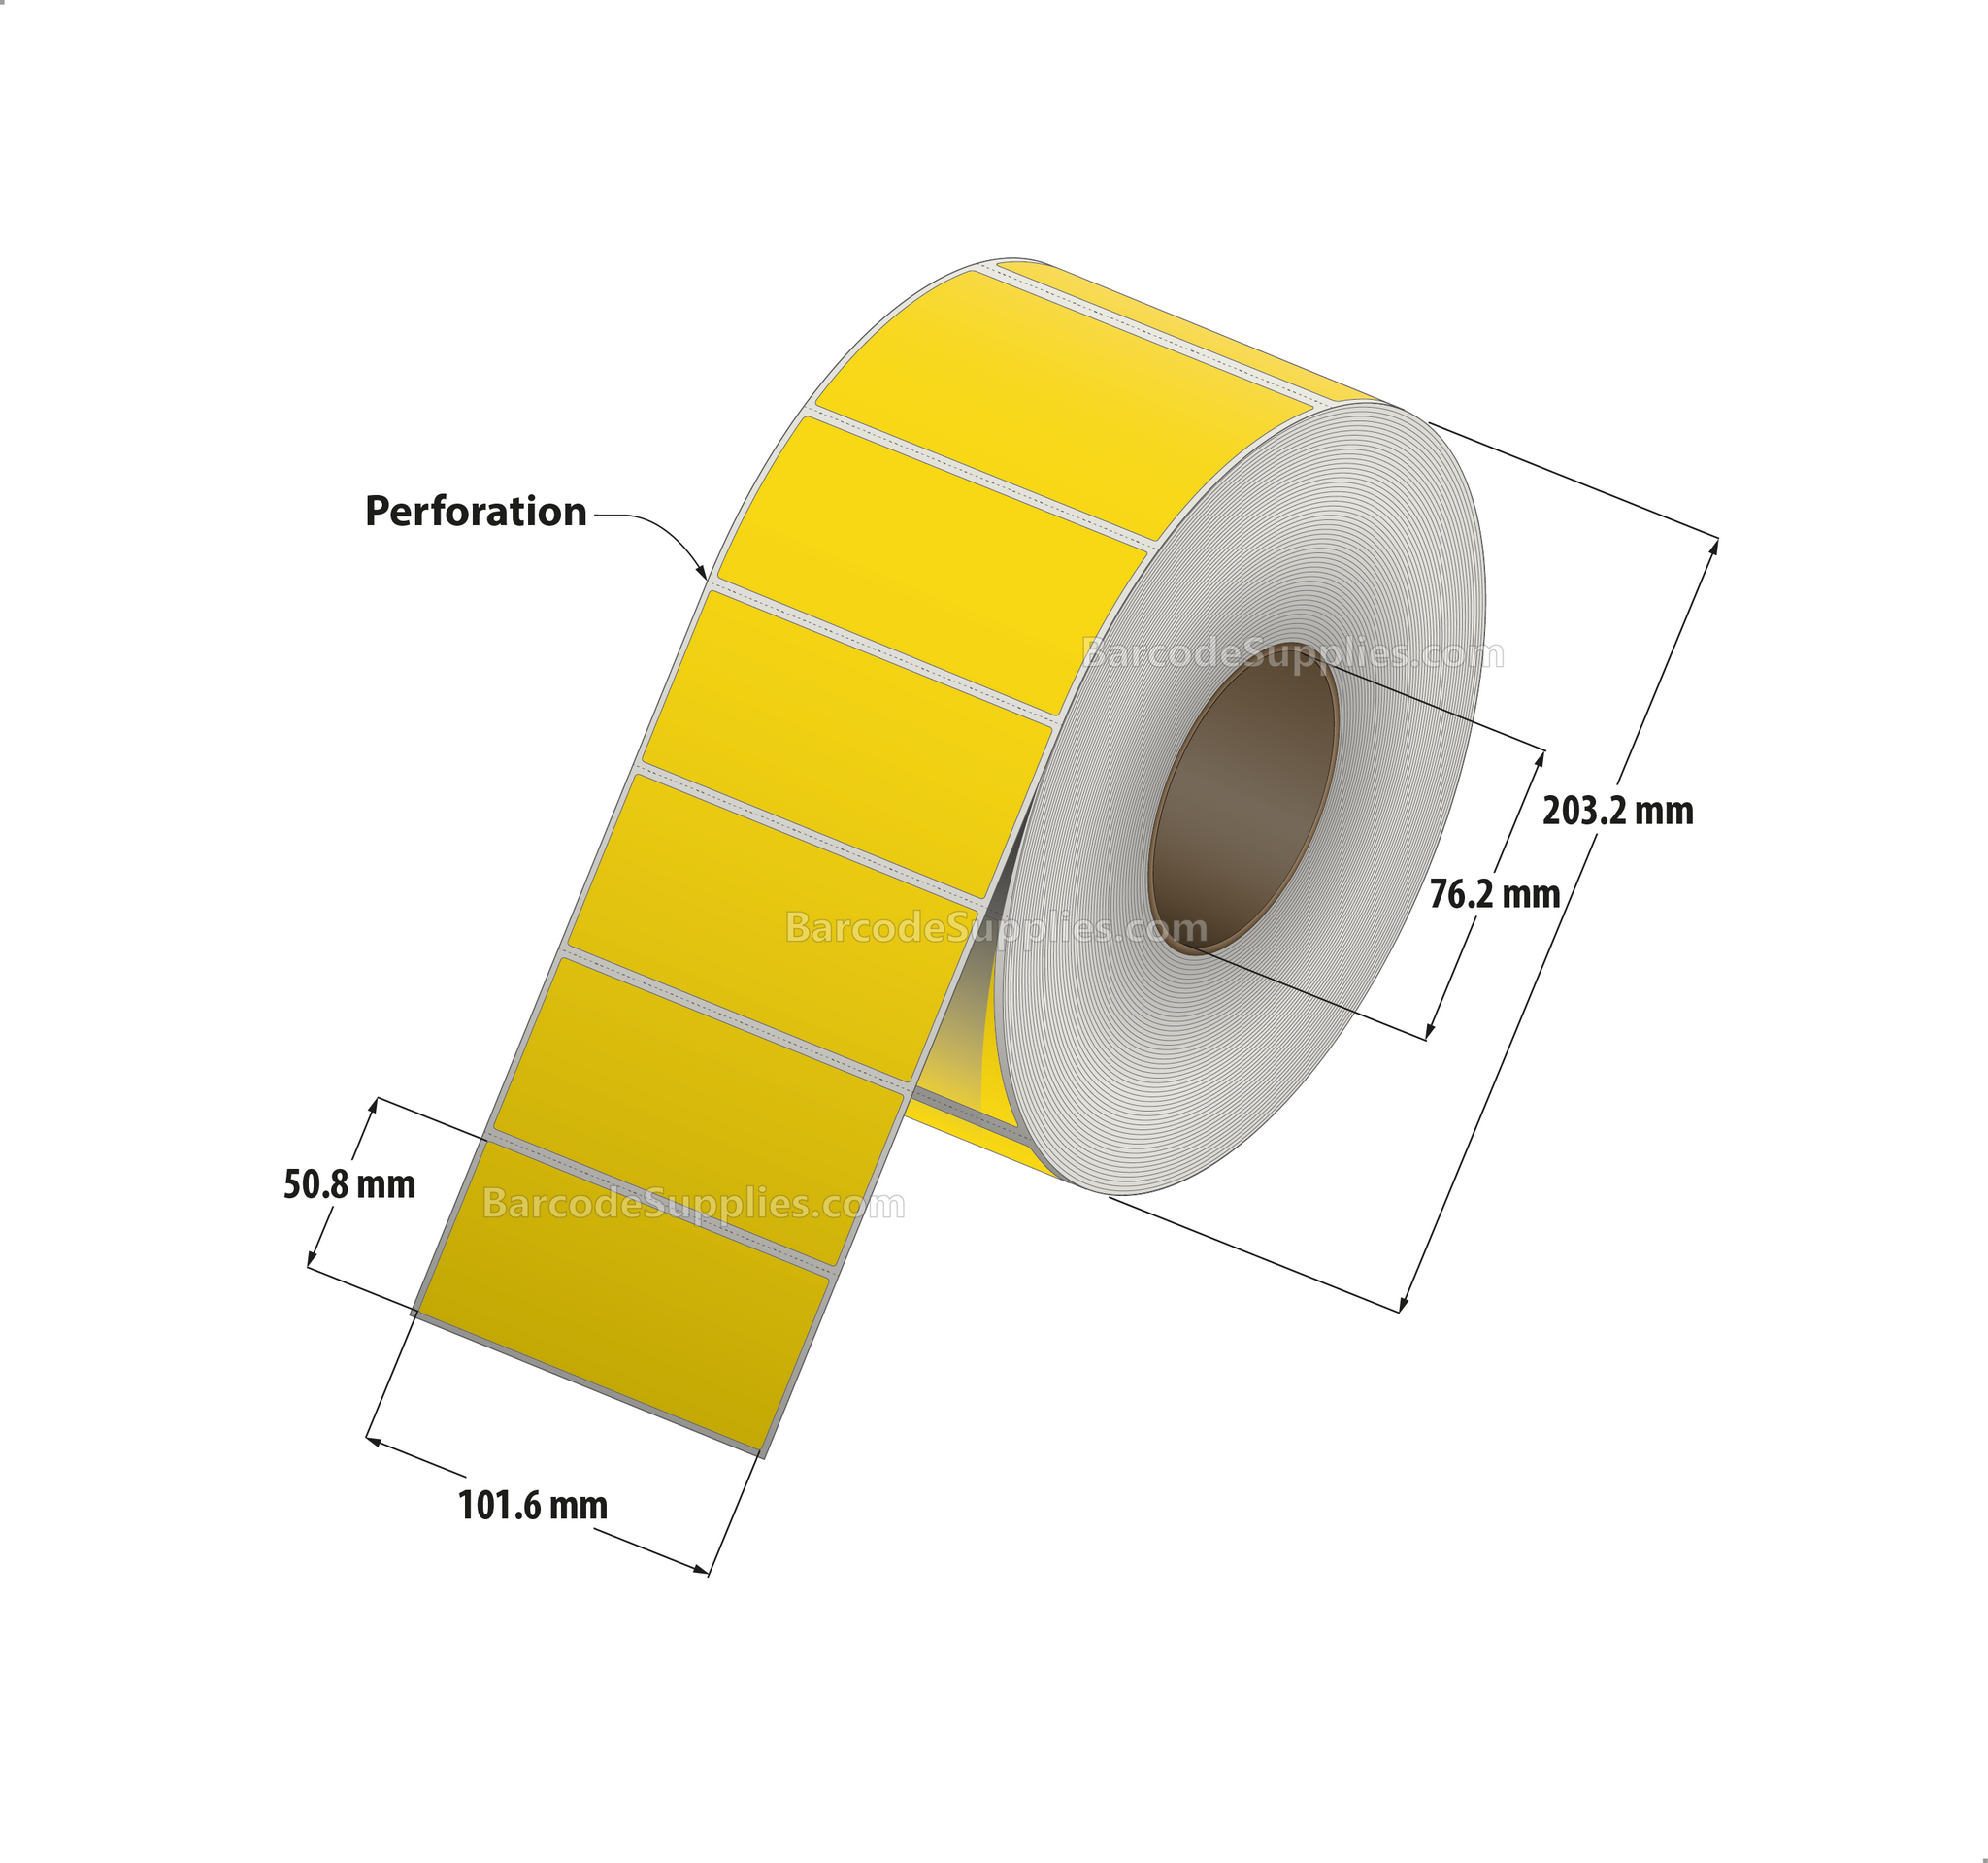 4 x 2 Thermal Transfer Pantone Yellow Labels With Permanent Adhesive - Perforated - 2900 Labels Per Roll - Carton Of 4 Rolls - 11600 Labels Total - MPN: RFC-4-2-2900-YL